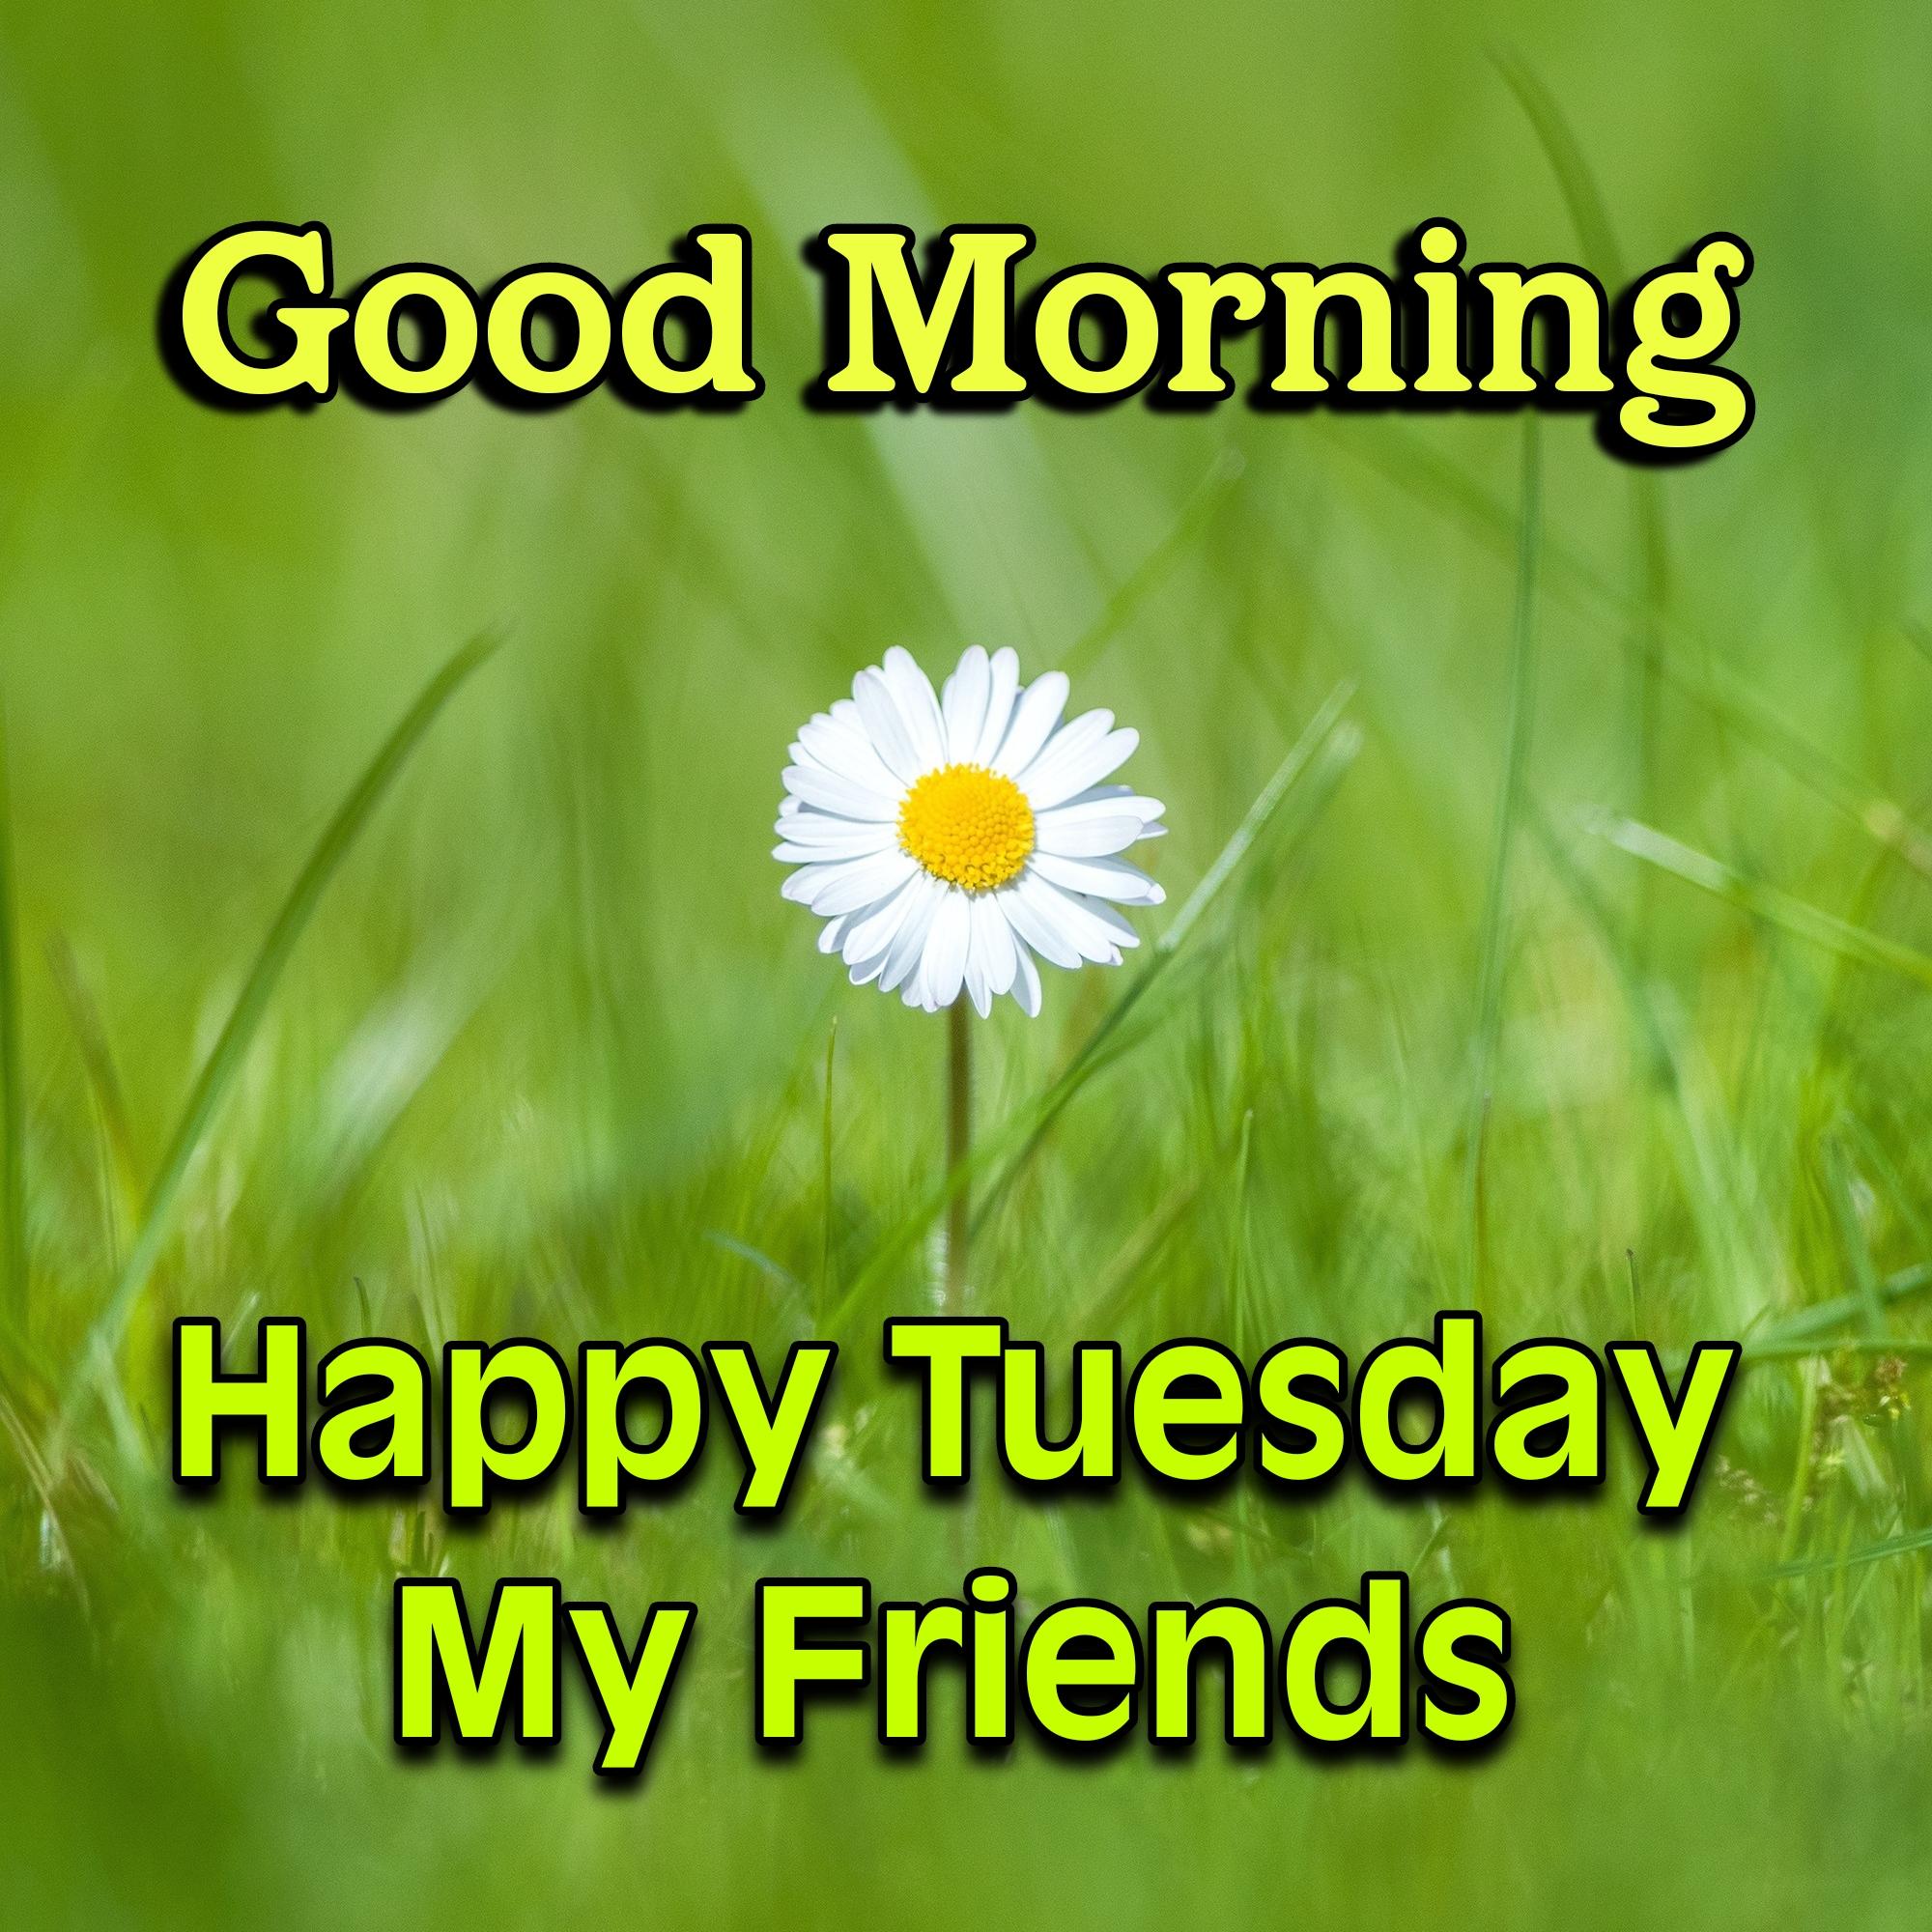 Good Morning Happy Tuesday My Friends Images